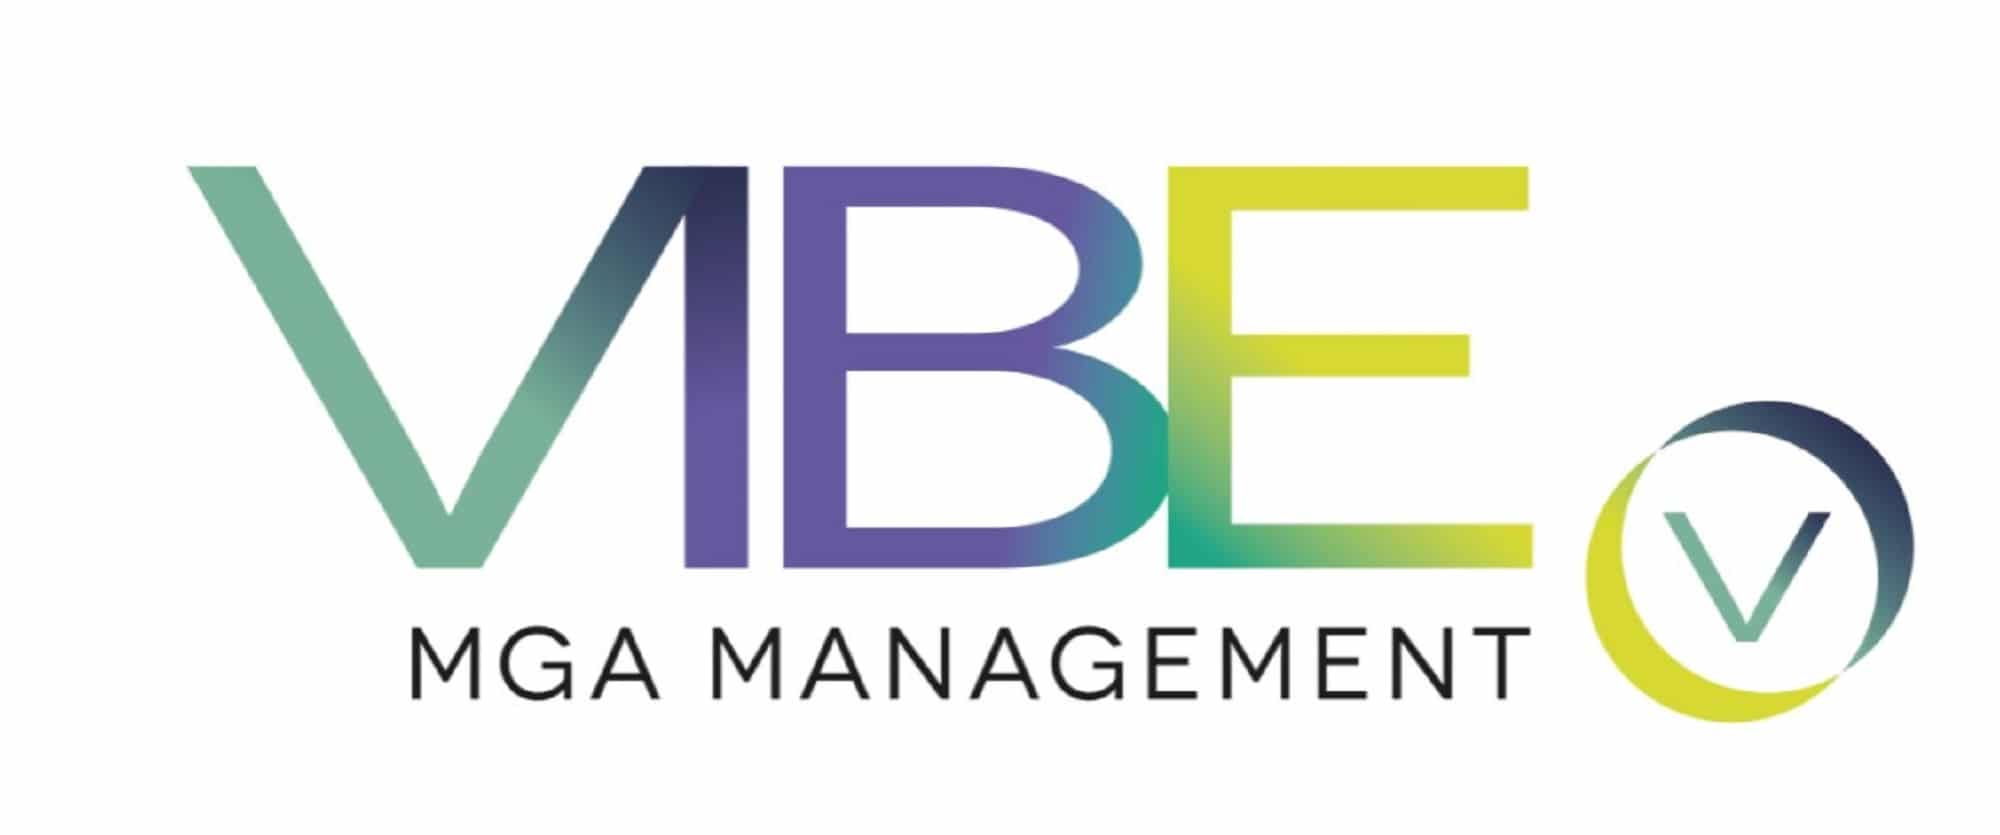 Vibe Syndicate Management (previously IMSL)